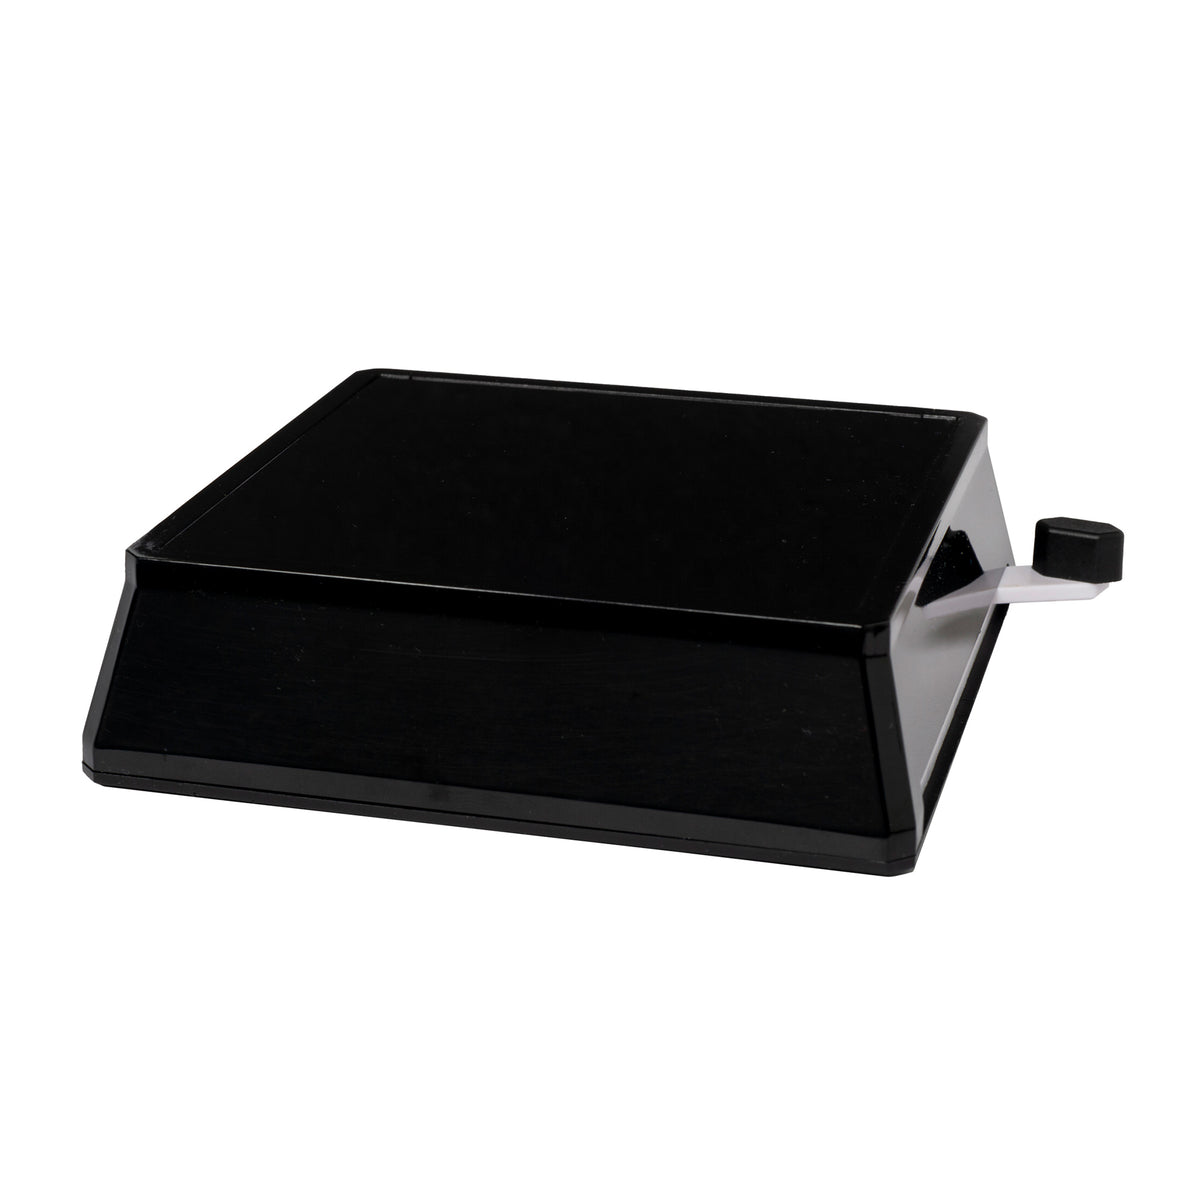 The Truweigh ECO Kinetic Energy scale has the expansion tray completely covering the scale